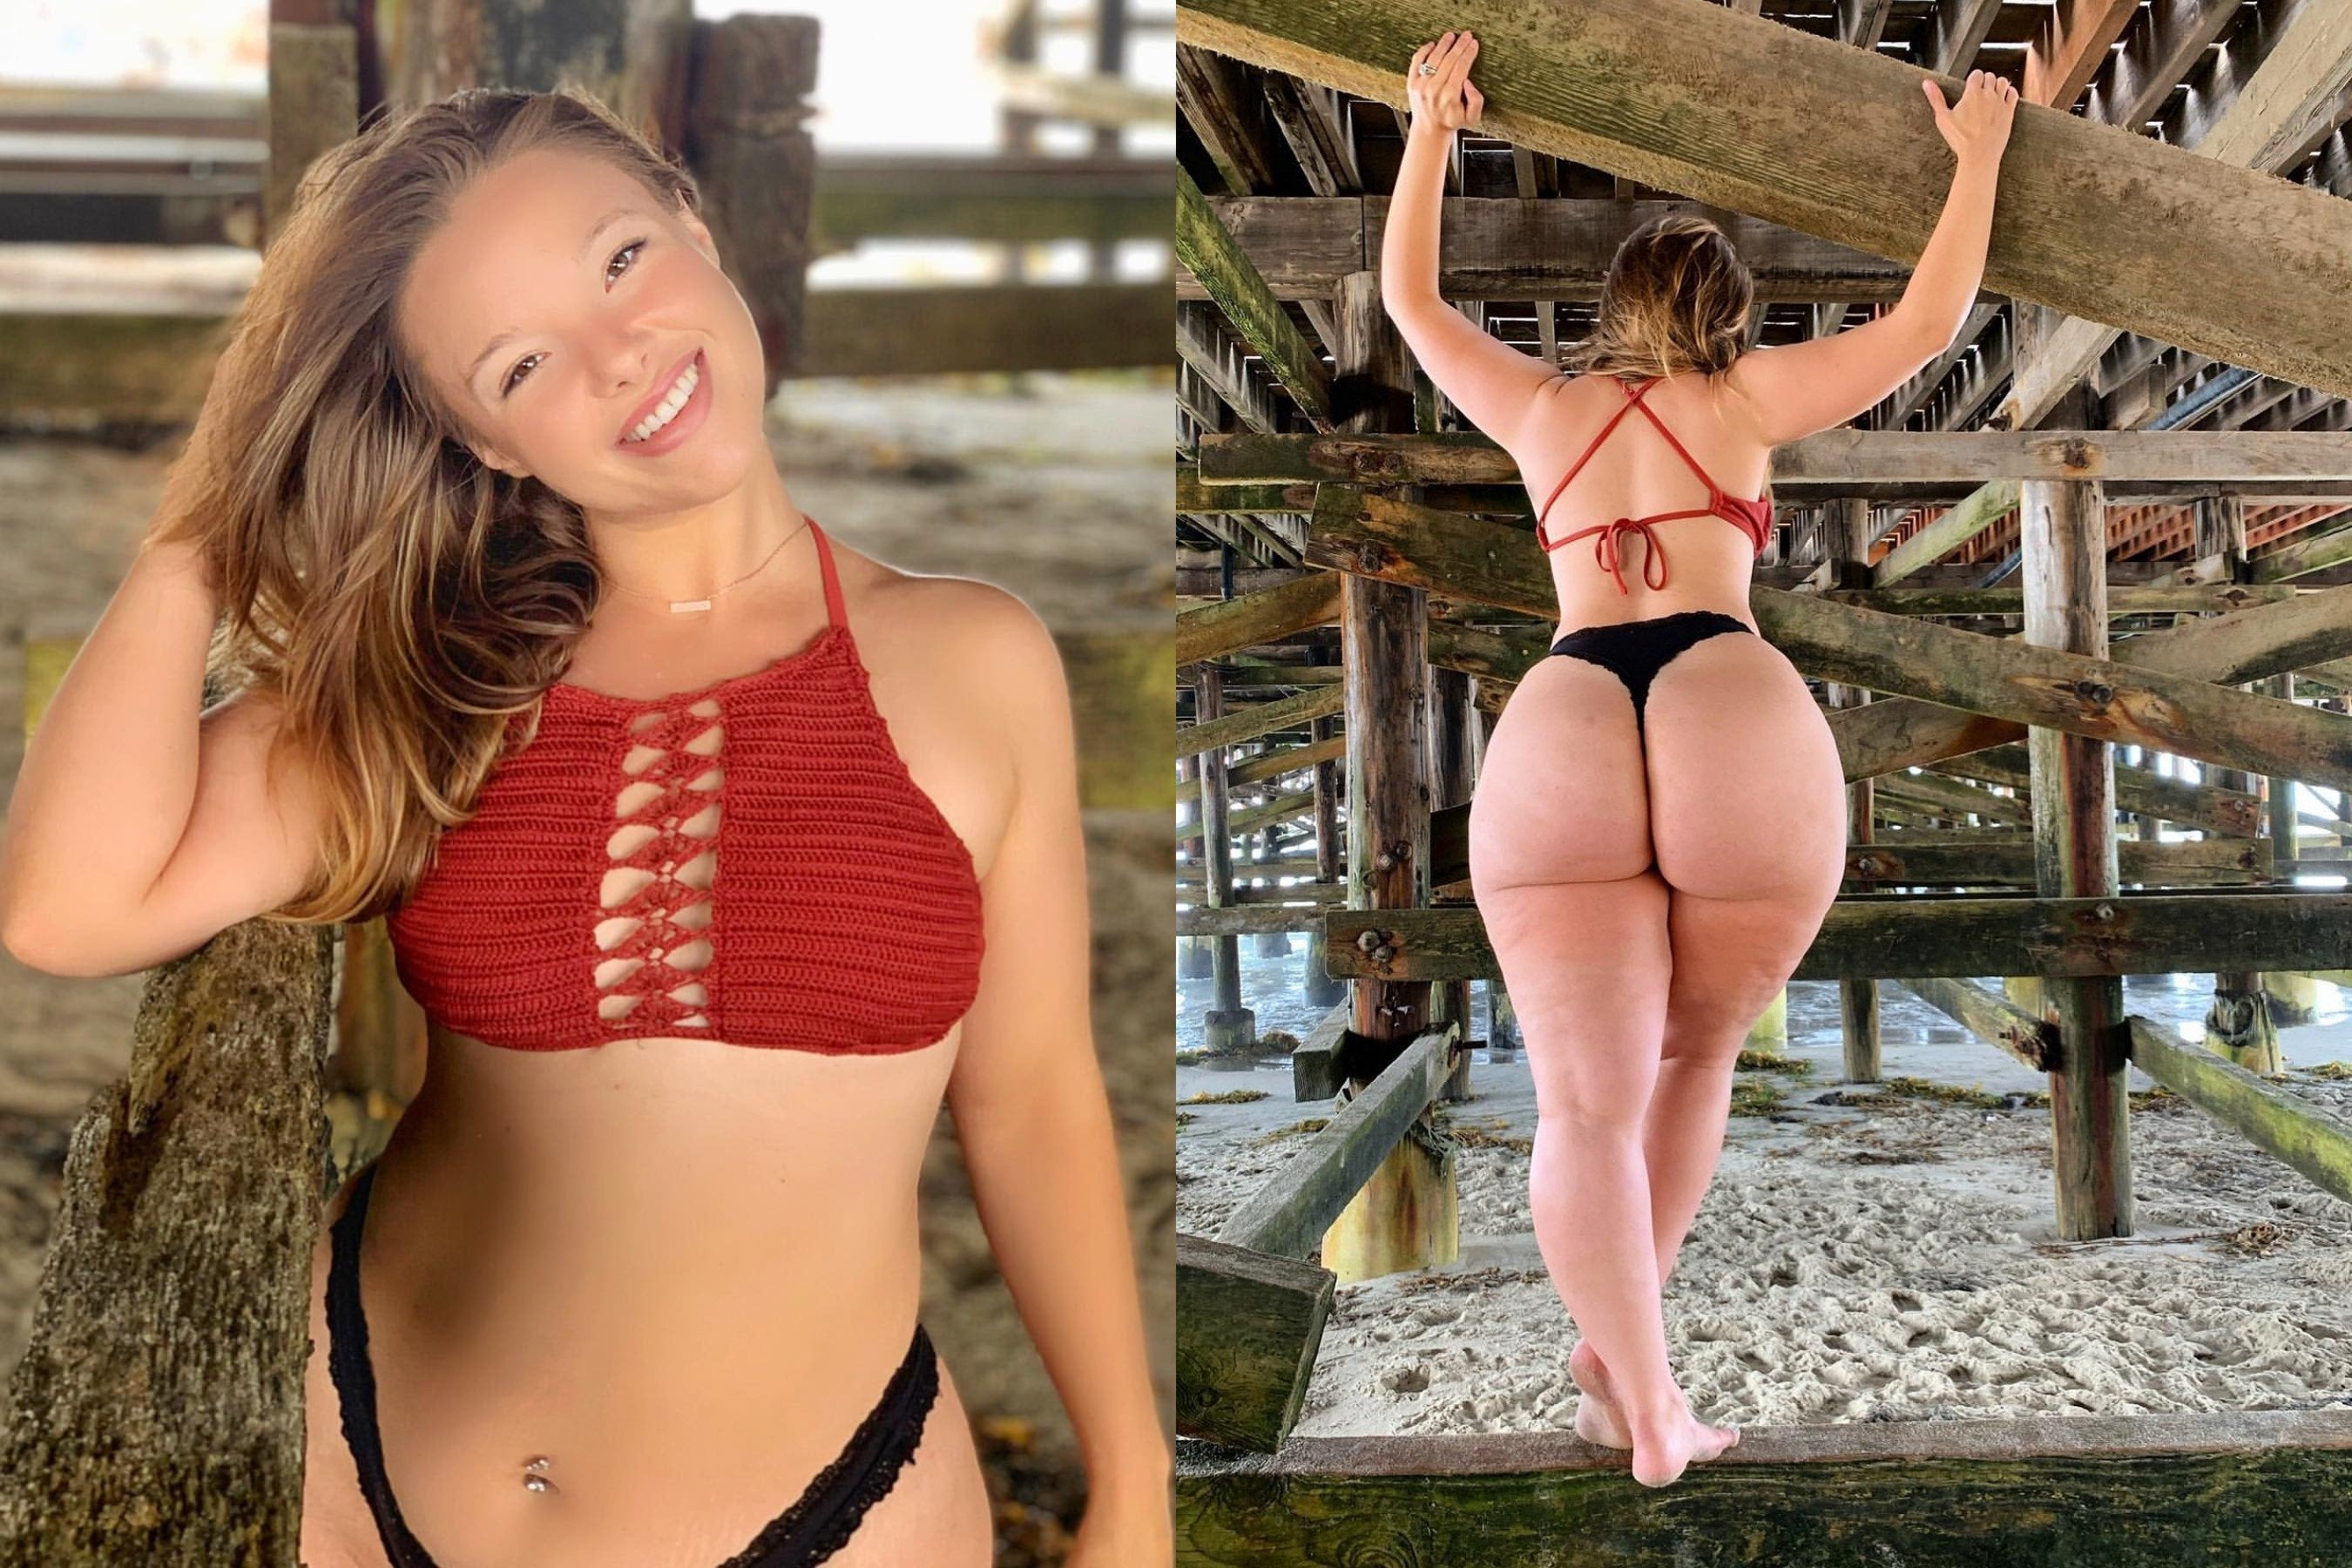 PAWG And then she turns